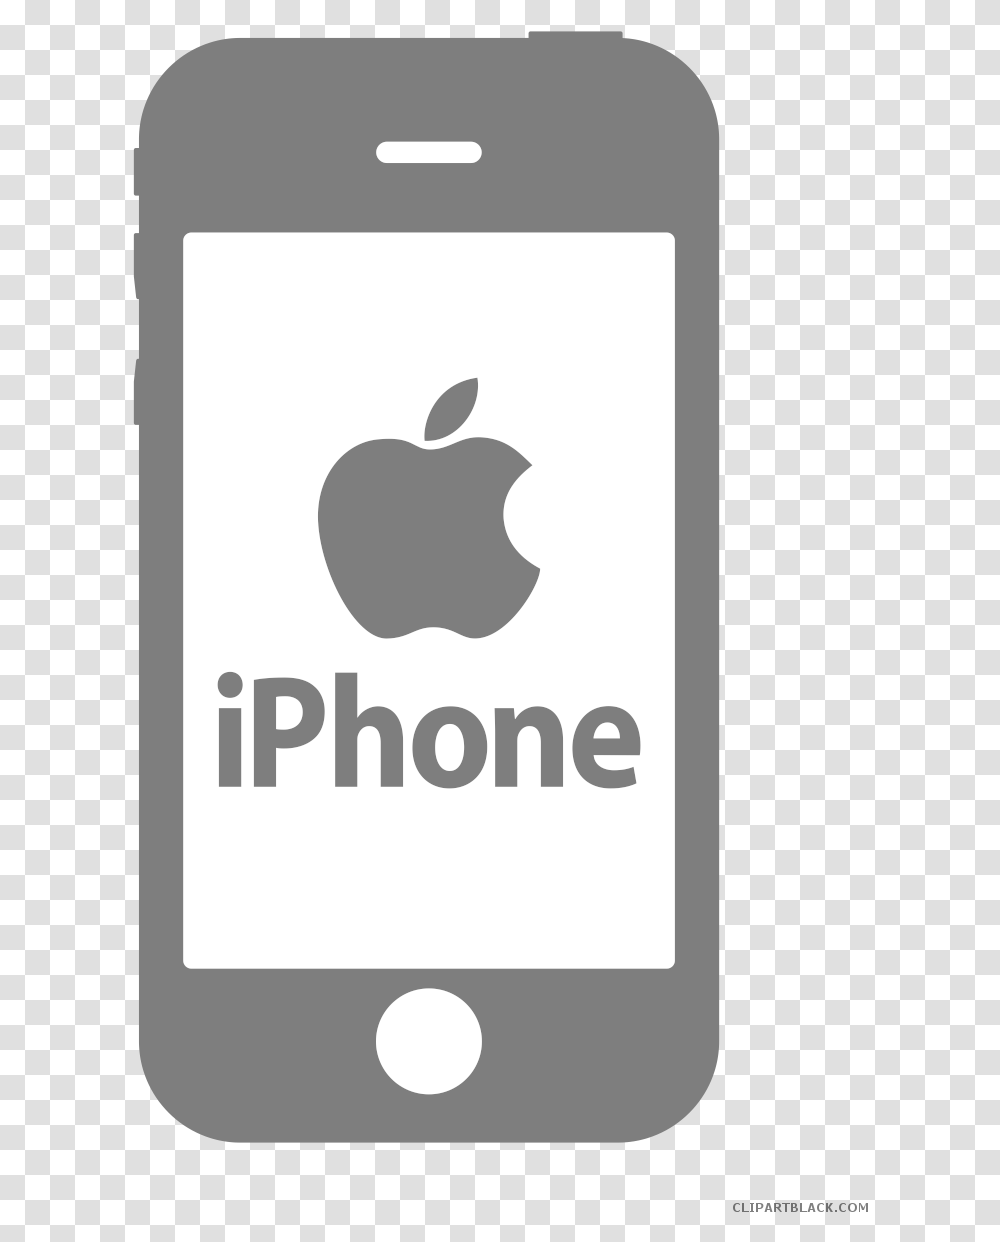 White Iphone Iphone Clipart Black And White, Electronics, Mobile Phone, Cell Phone Transparent Png